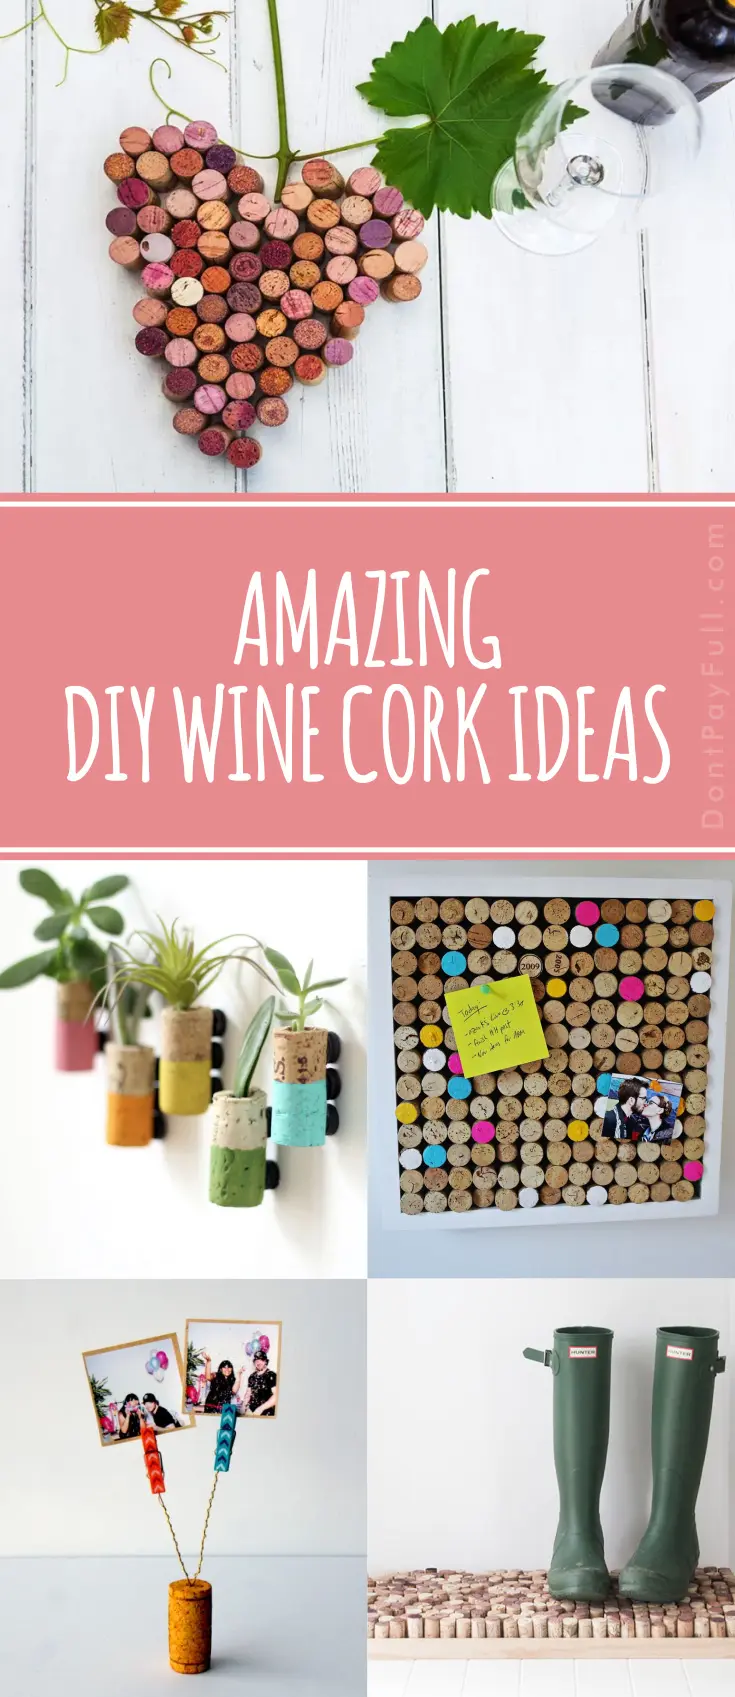 Amazing Wine Cork Crafts That Can Make You Money